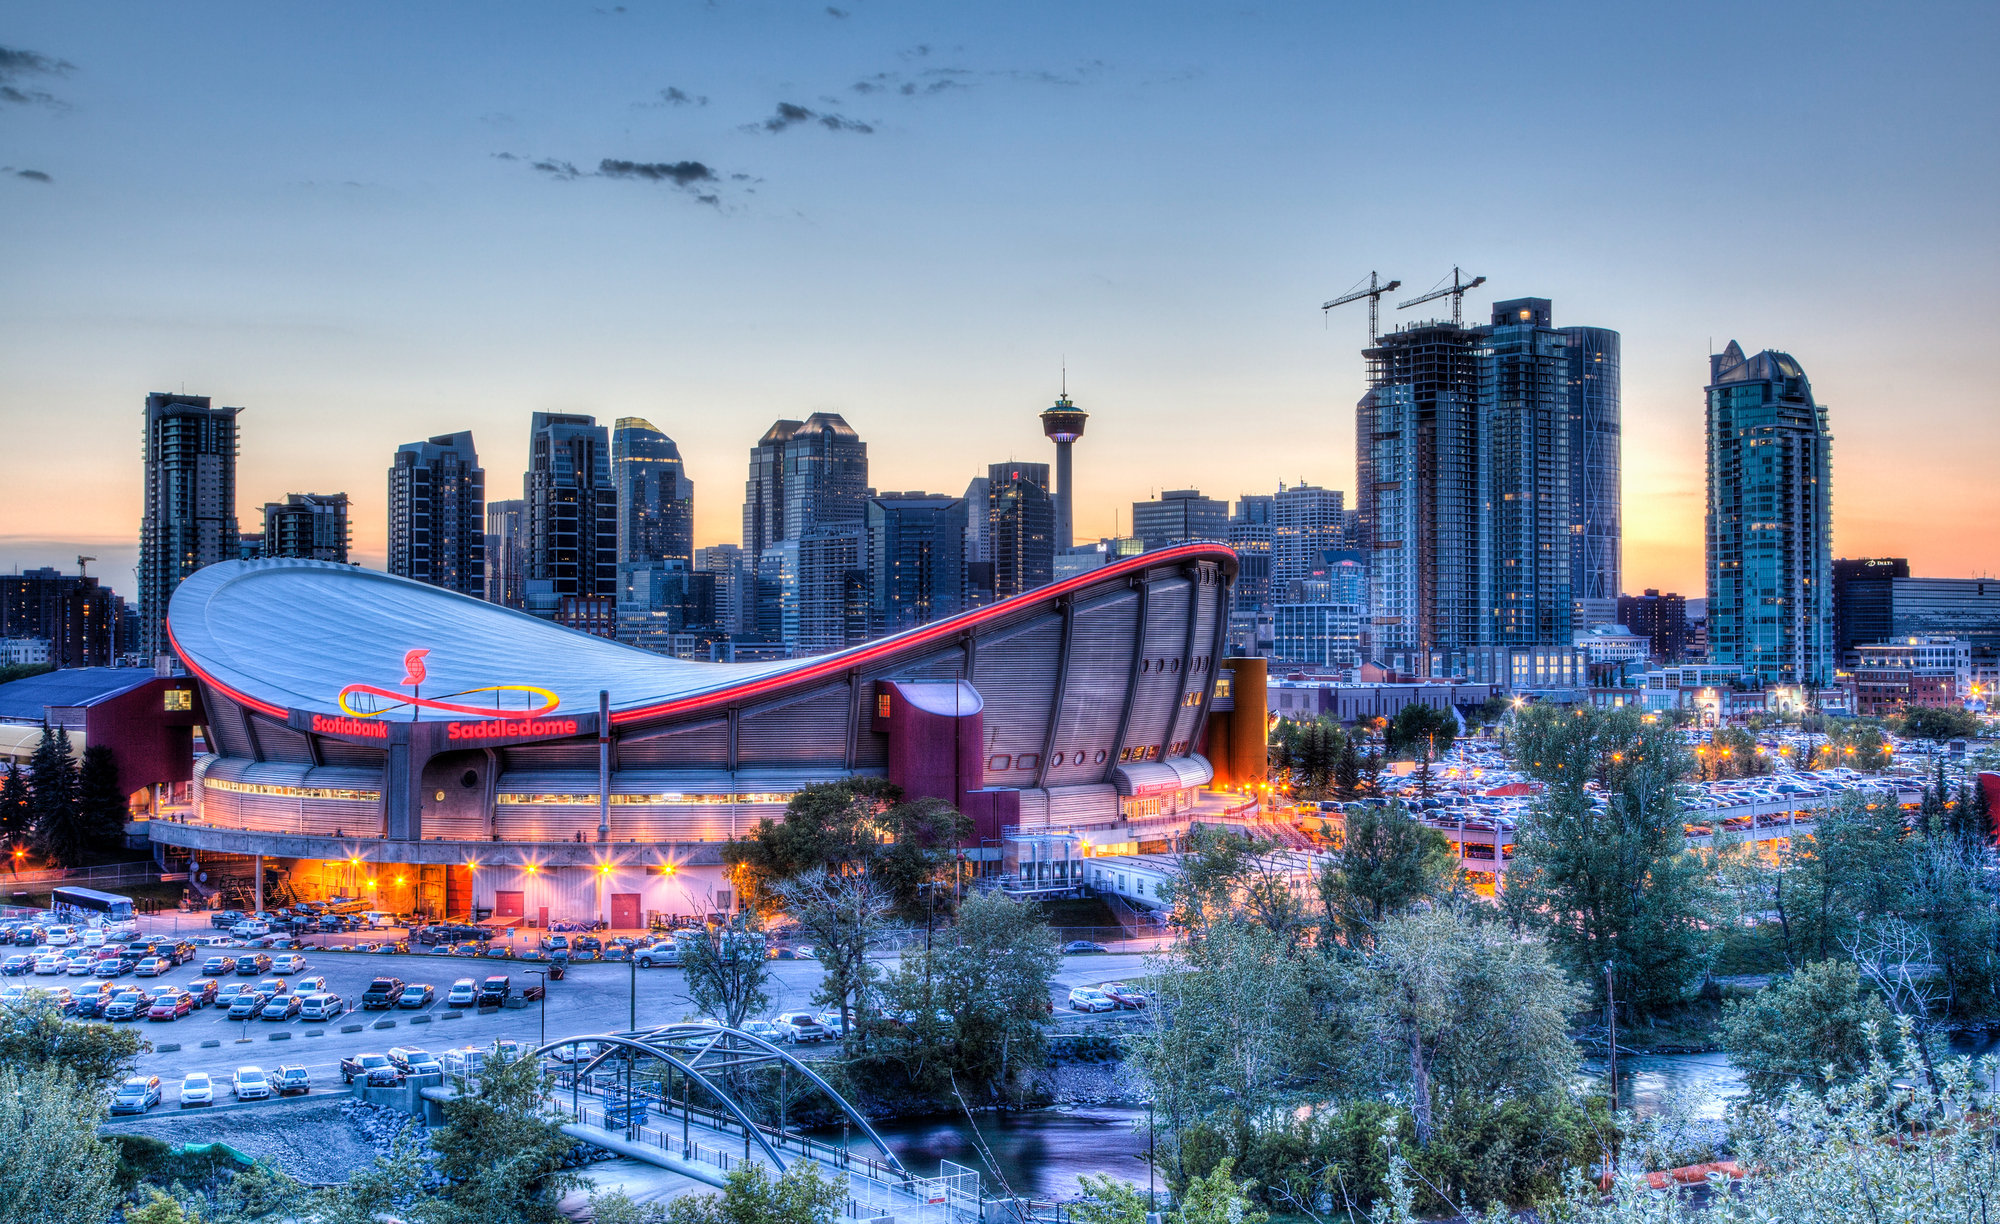 The Calgary saddledome with highrises in the background